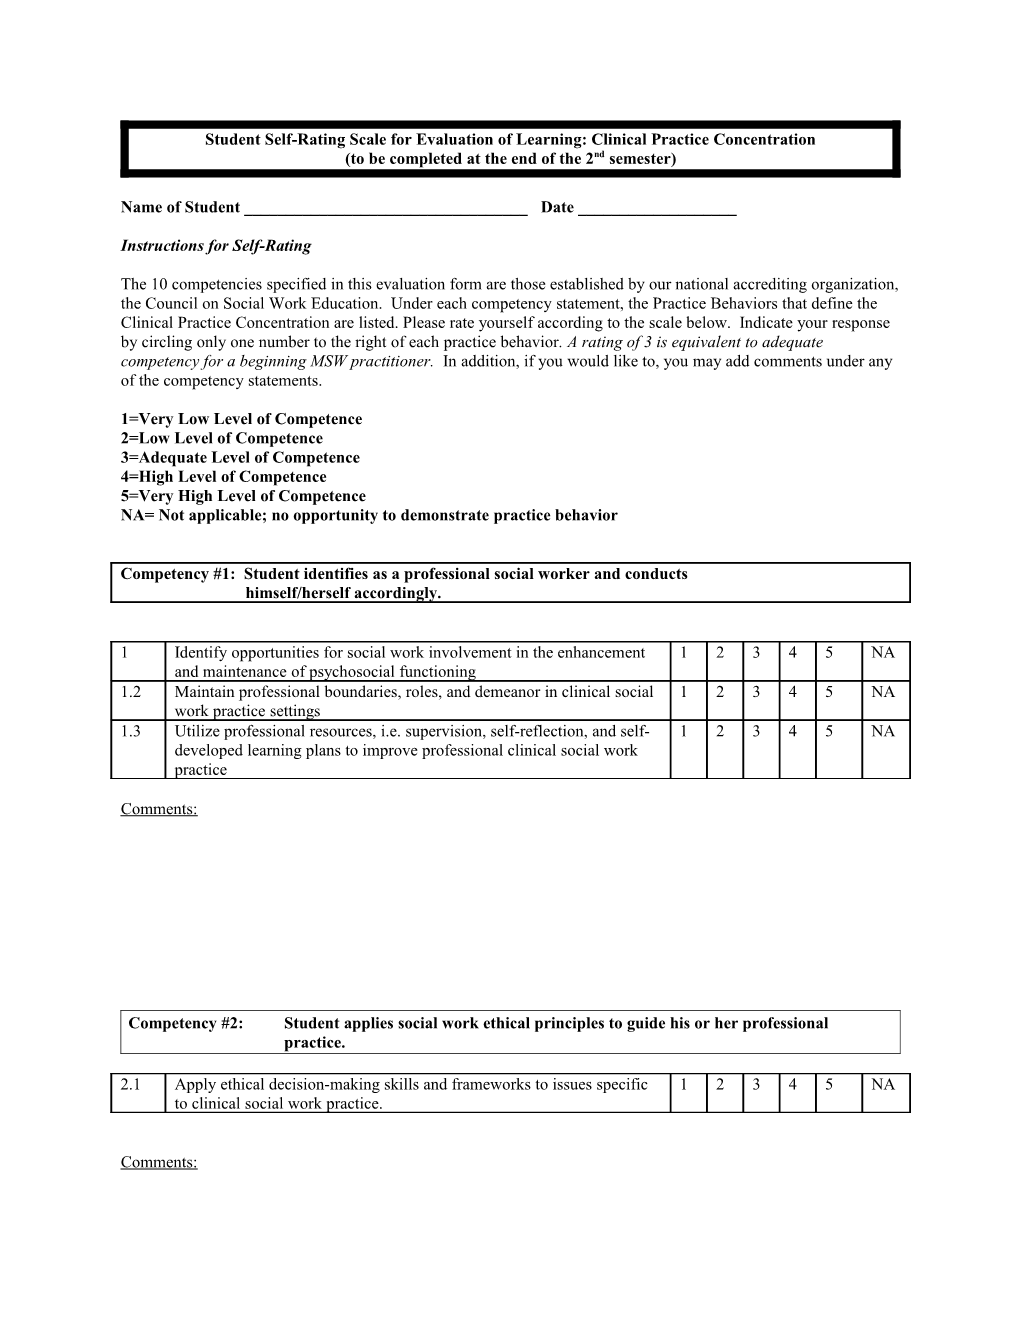 Studentself-Rating Scale for Evaluation of Learning: Clinical Practice Concentration